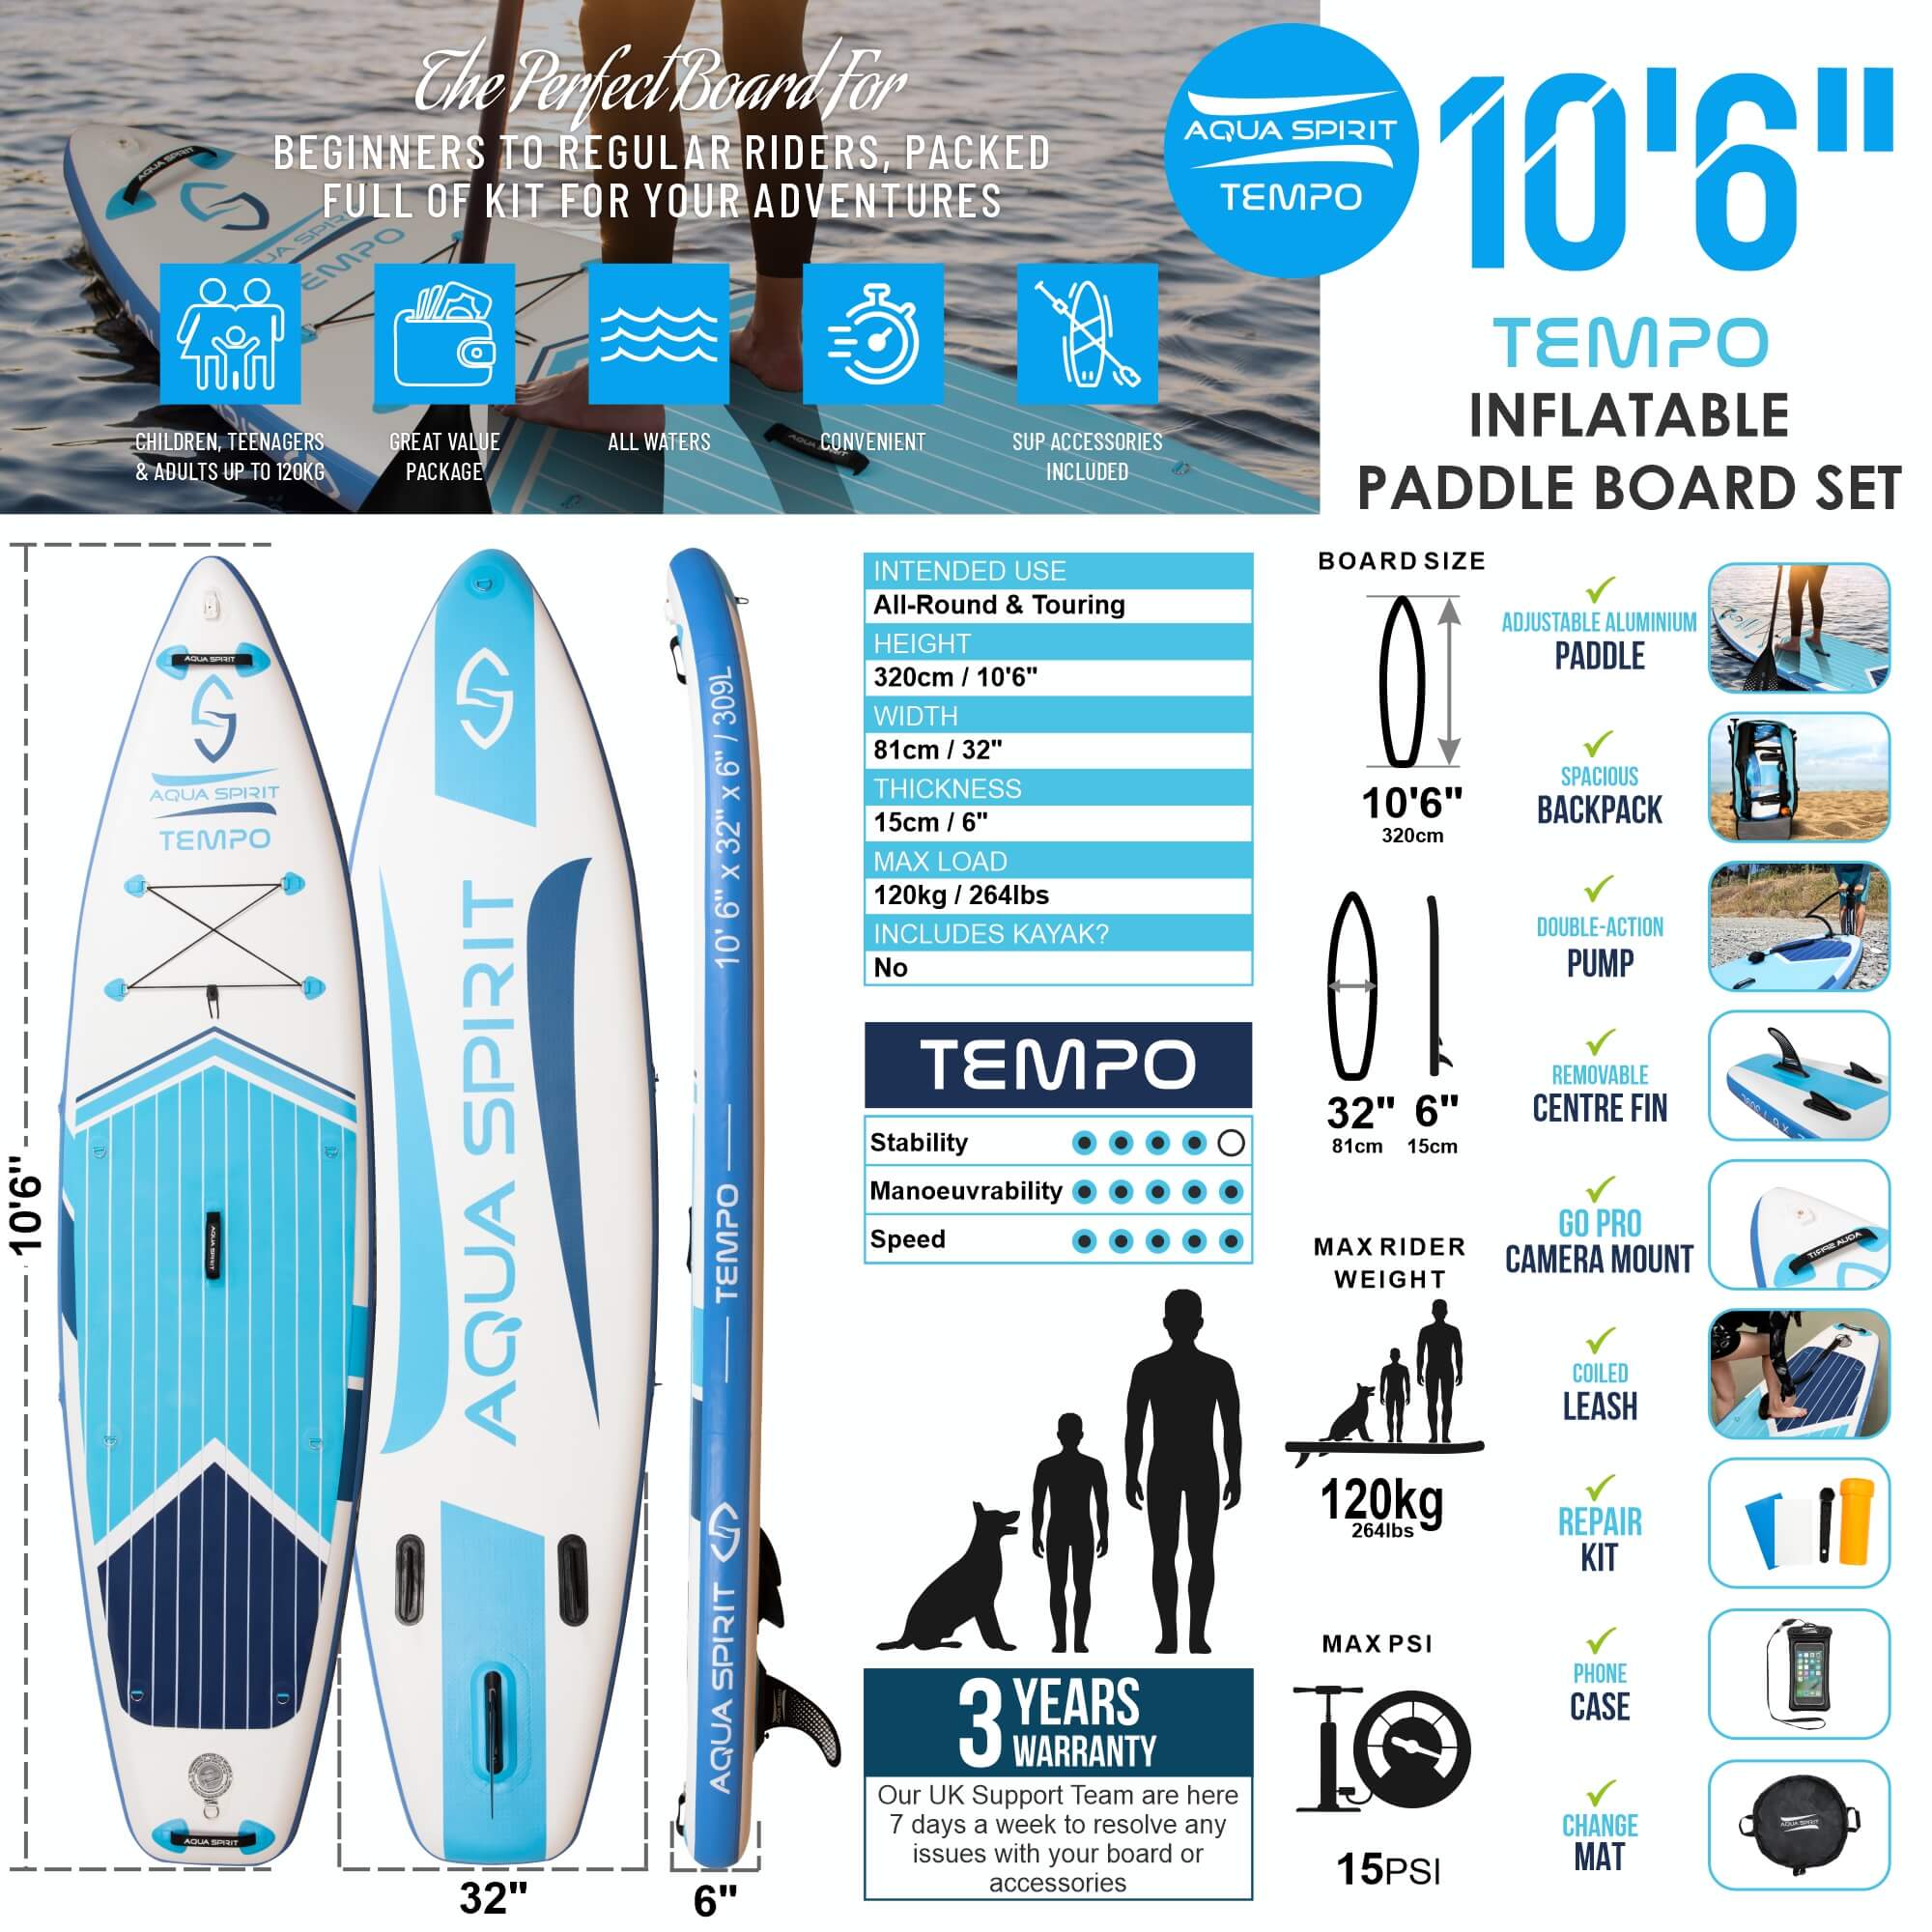 Aqua Spirit Tempo 10'/10'6 iSUP Inflatable Stand Up Paddle Board For Adult Beginners/intermediate With Backpack, Leash, Paddle, Changing Mat & Waterproof Phone Case, All-Inclusive Package, 3-Years Of Complete Brand Warranty - Aqua Spirit iSUPs UK